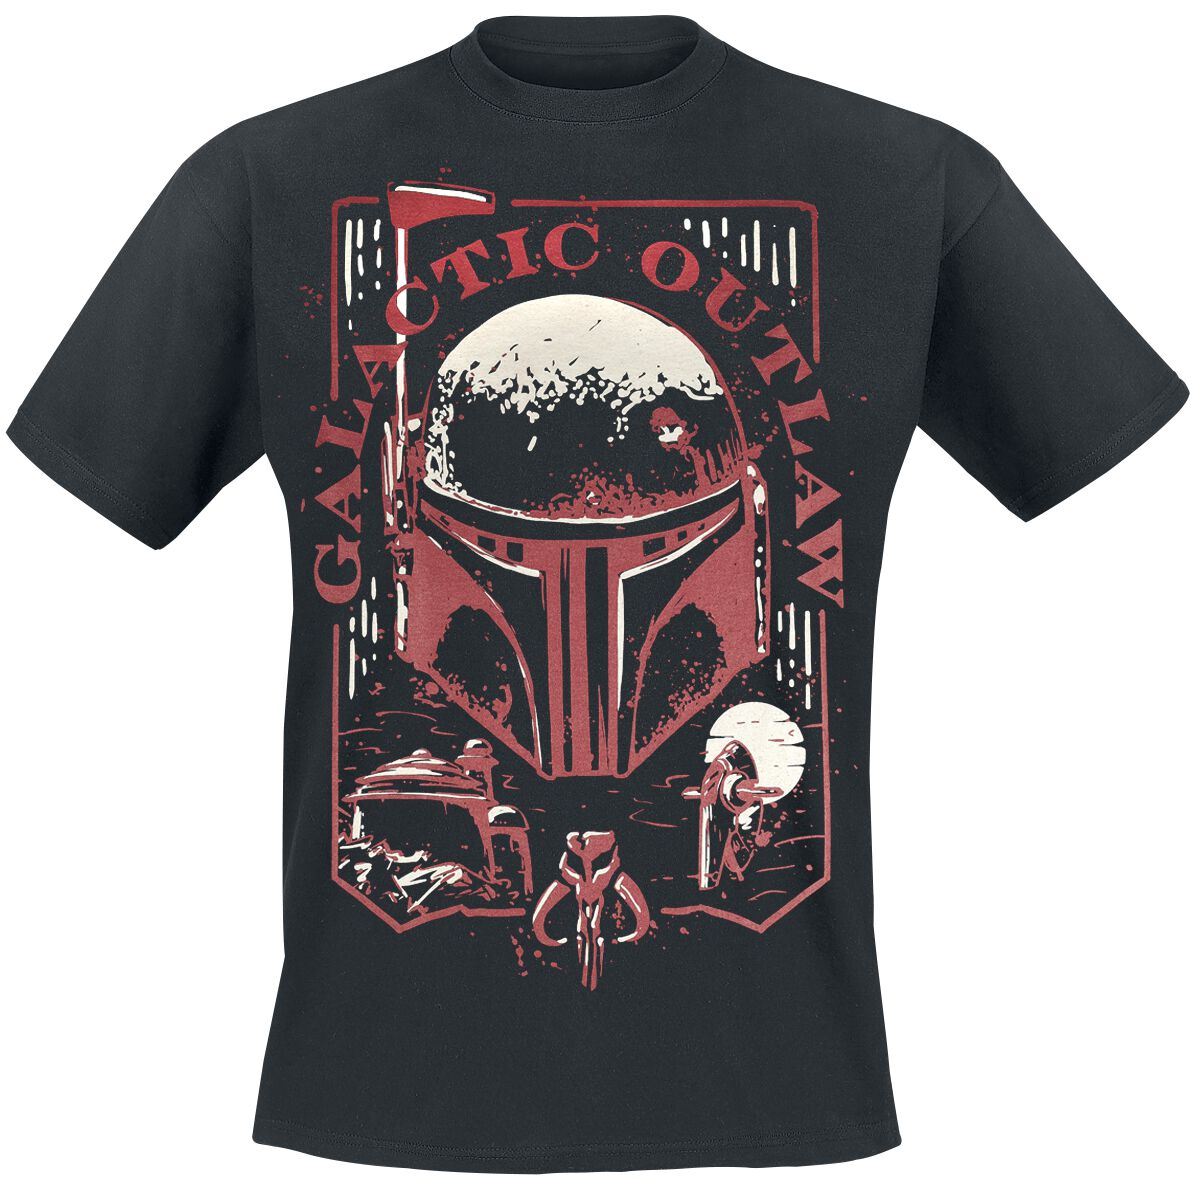 Star Wars The Book Of Boba Fett - Galactic Outlaw T-Shirt schwarz in M